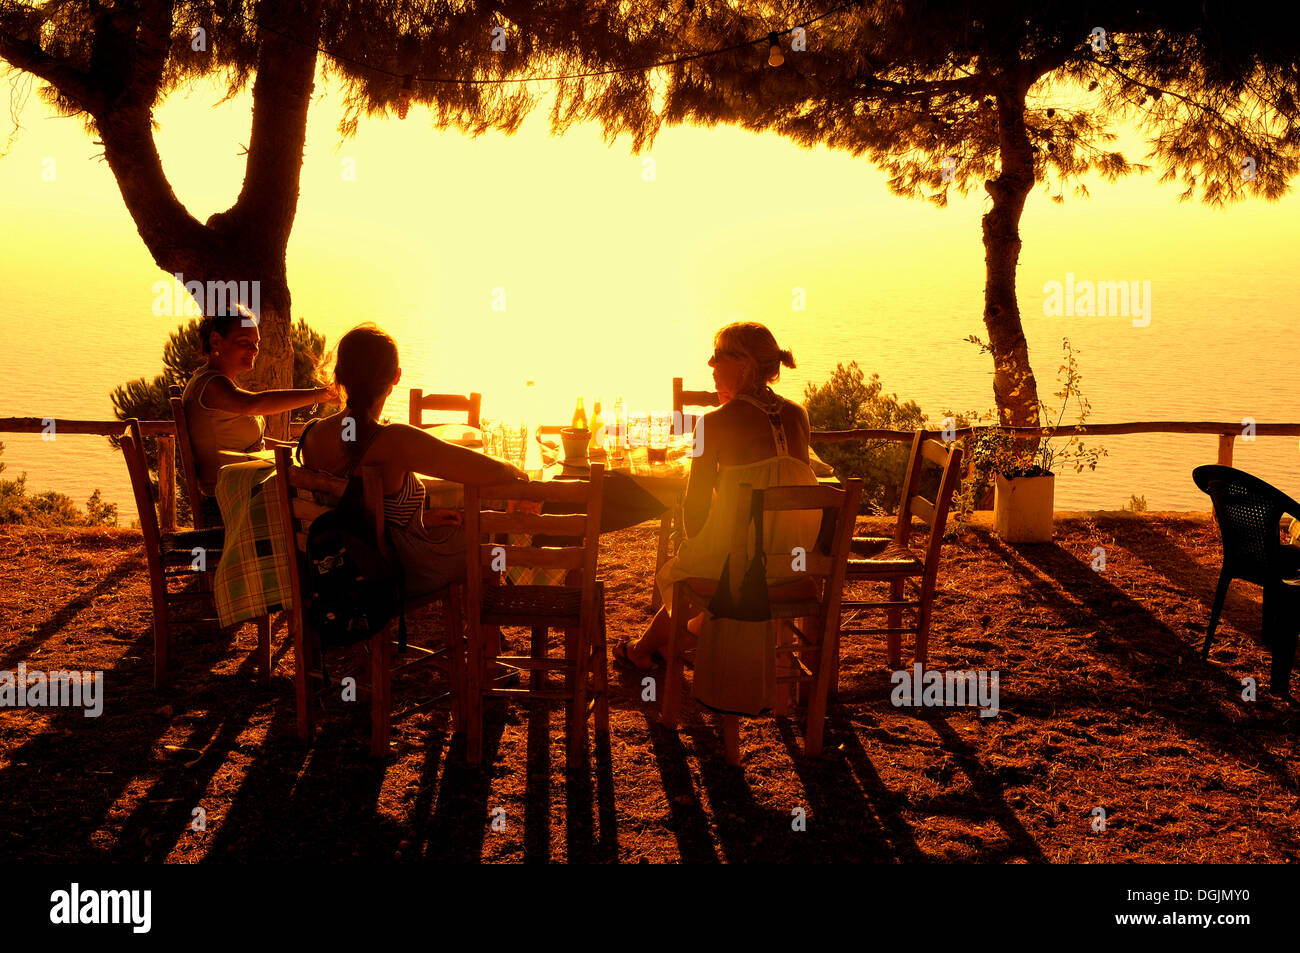 Three women sitting at a table at sunset, evening mood in a Greek seaside garden, Lefkas or Lefkada, Greece, Europe Stock Photo